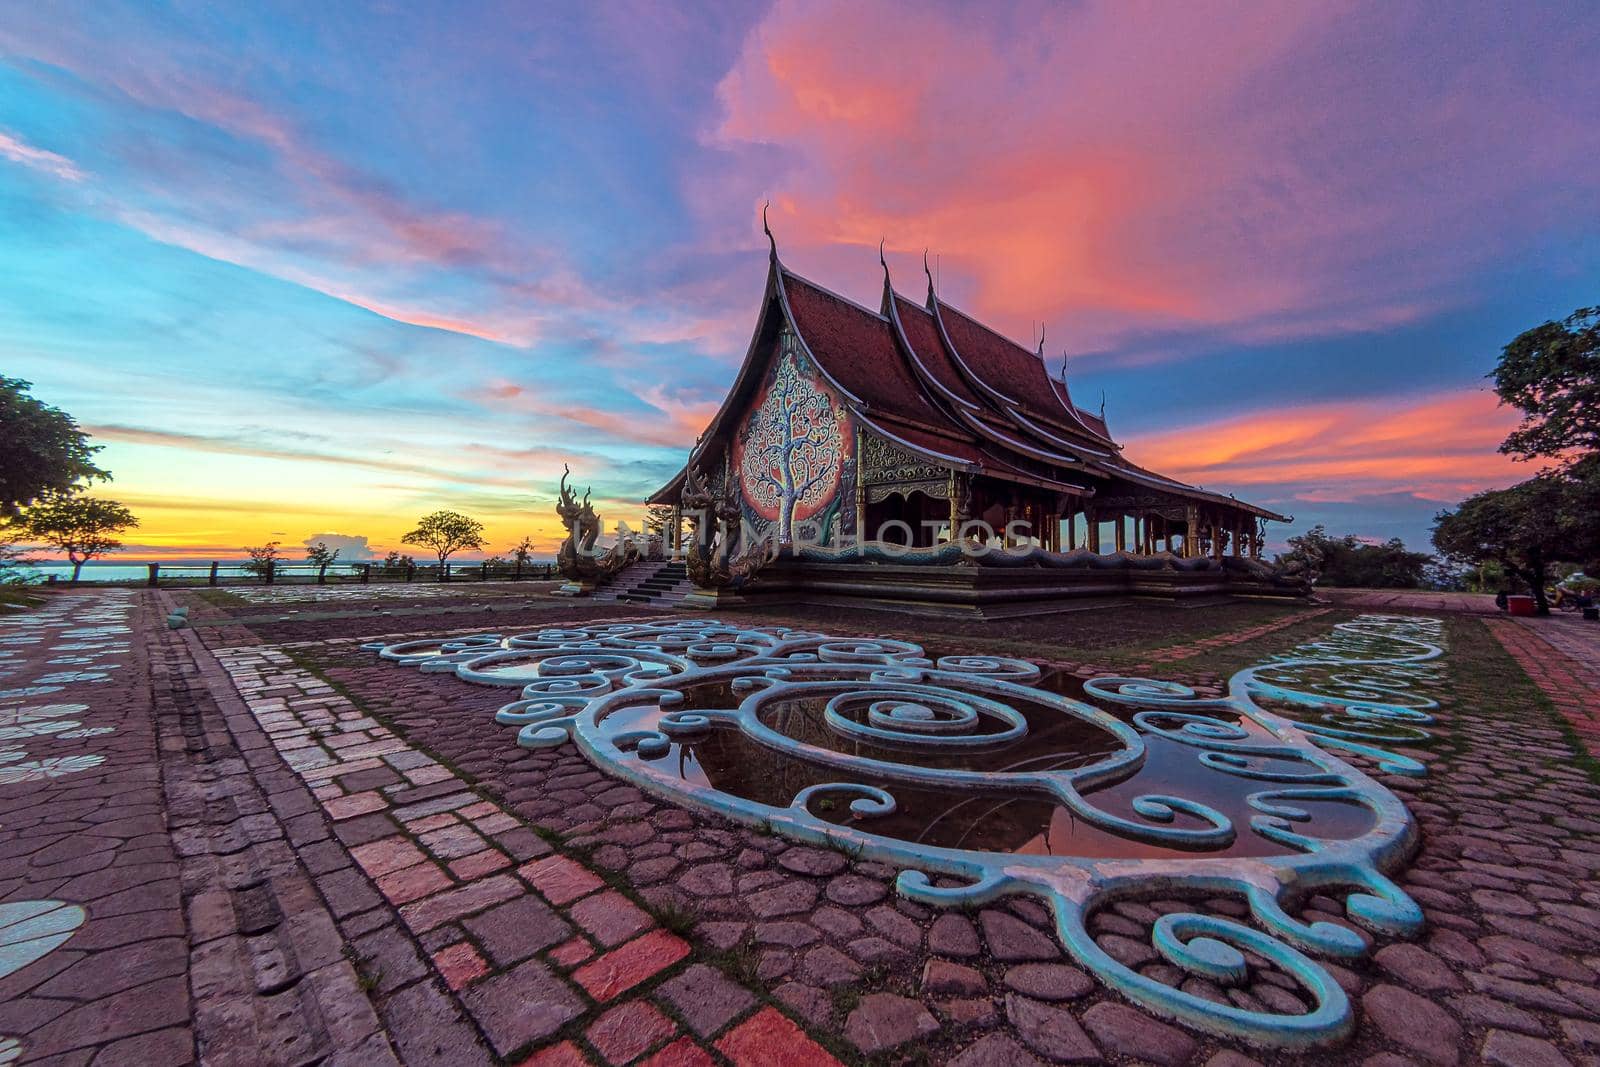 Twilight shot of Sirindhorn Wararam Phu Prao Temple is public Temple in Ubonrachatani, Thailand. Popularly known as the luminous temple Very Beautiful attractions.